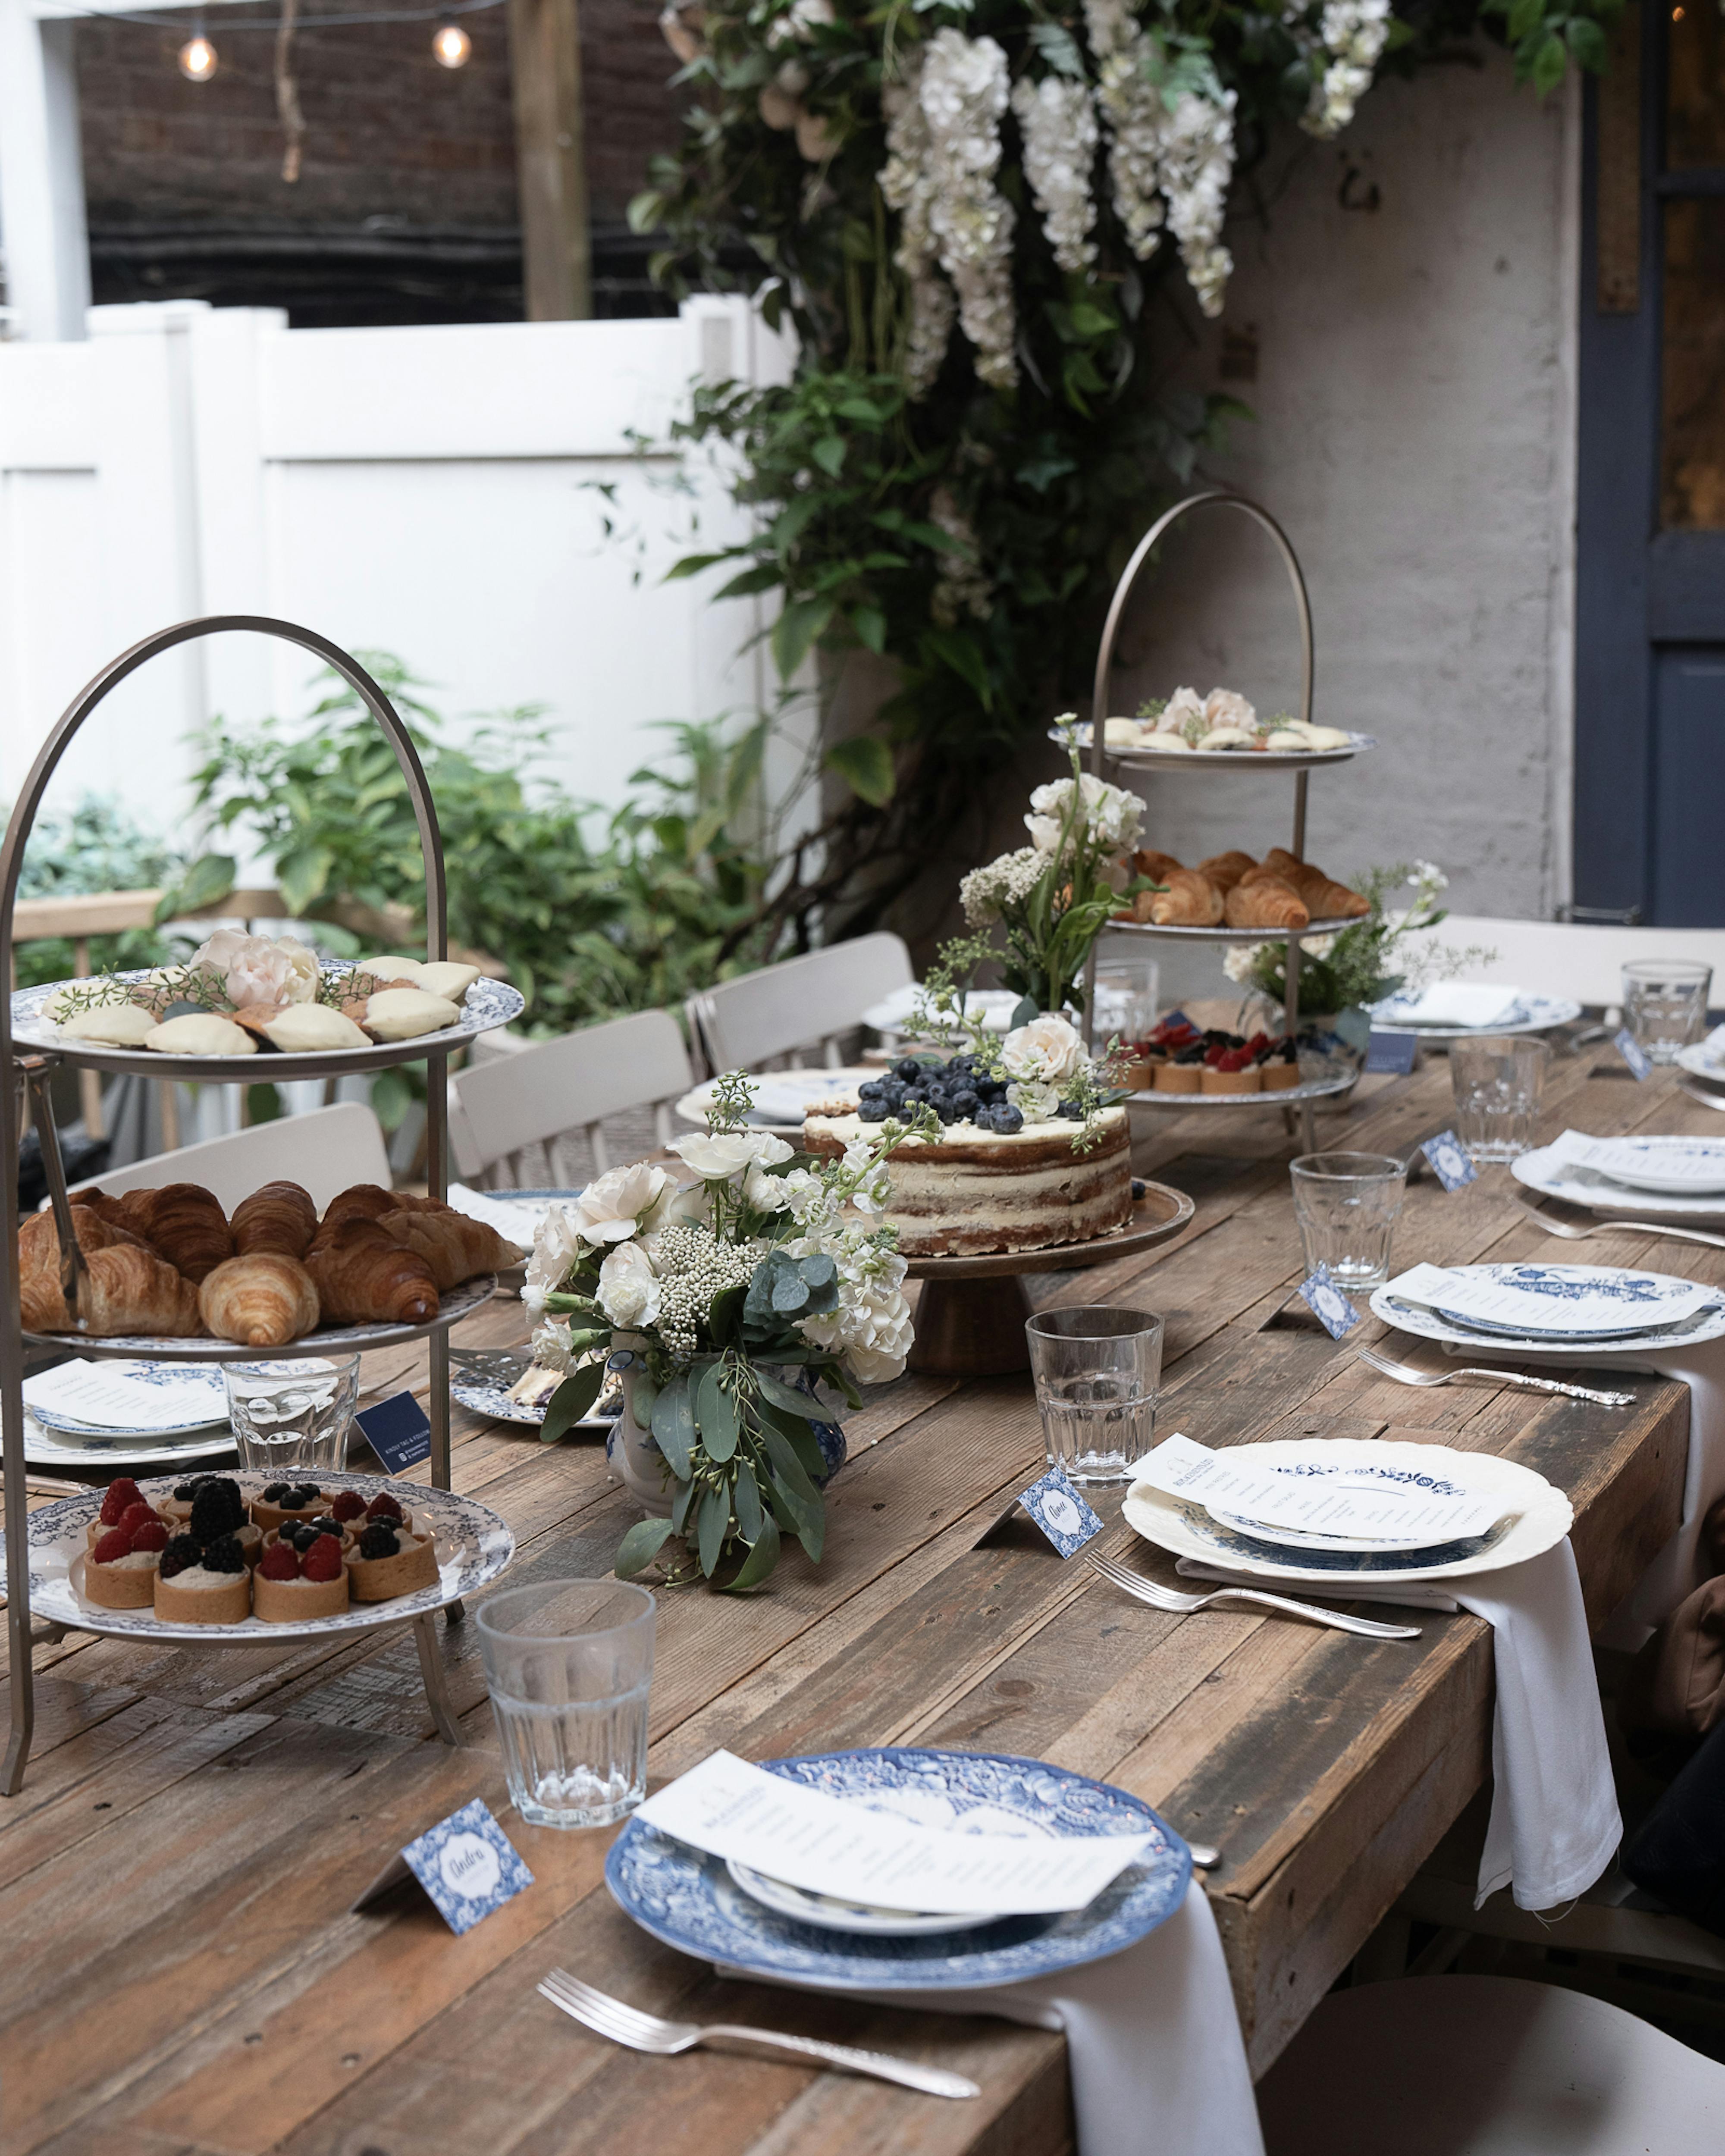 long rustic wooden table with blue and white plates and table settings, two tiered stands with pastries, and a rustic vanilla cake in the middle of the table